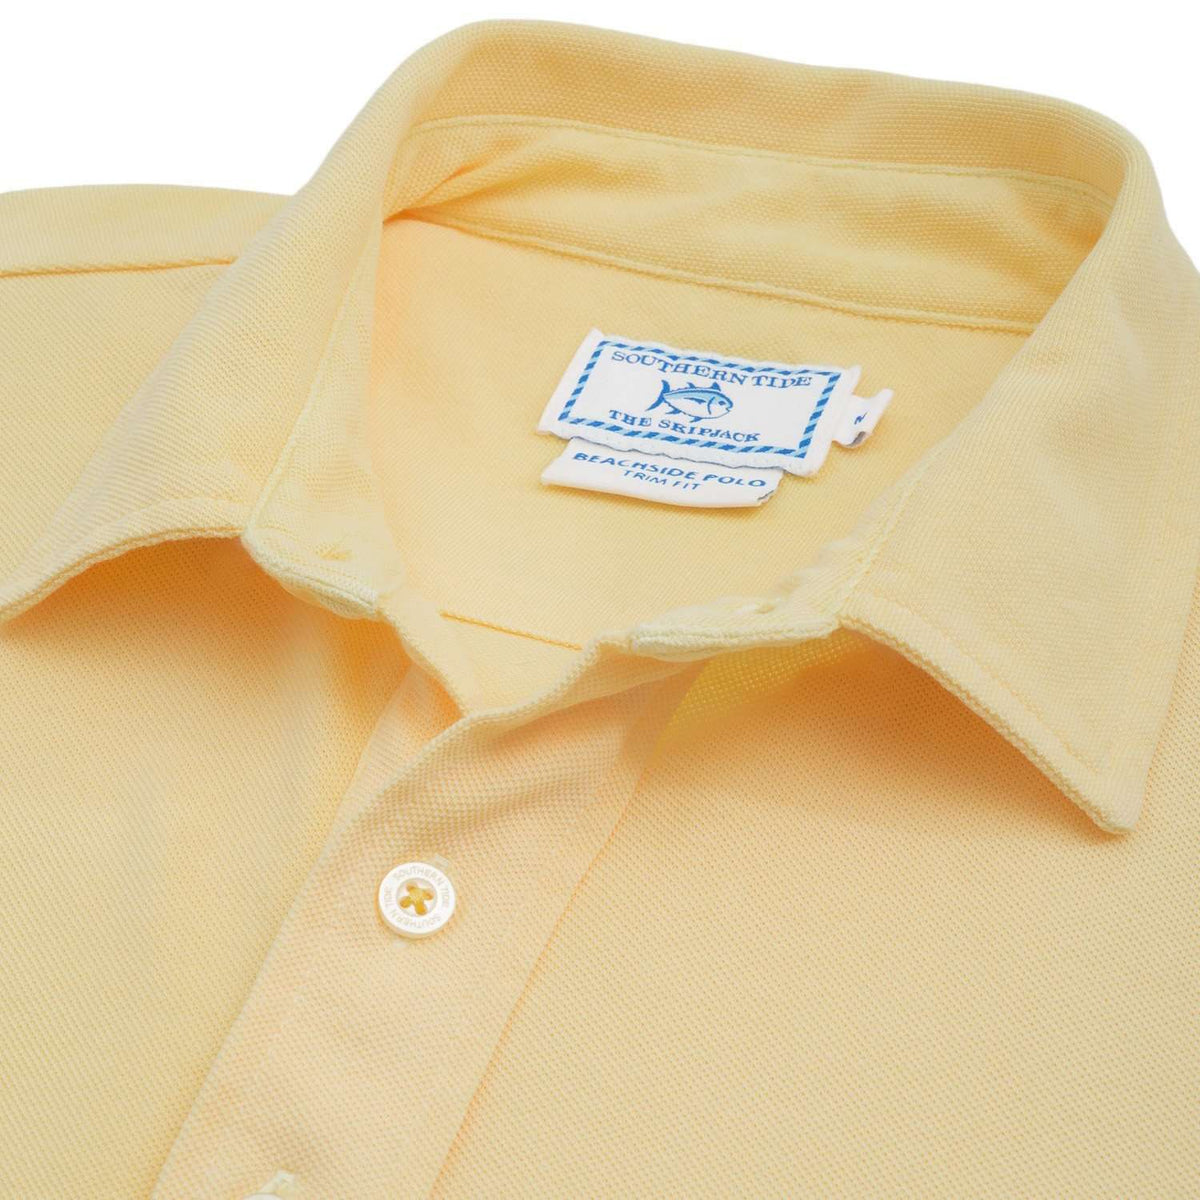 Short Sleeve Beachside Polo in Pineapple by Southern Tide - Country Club Prep